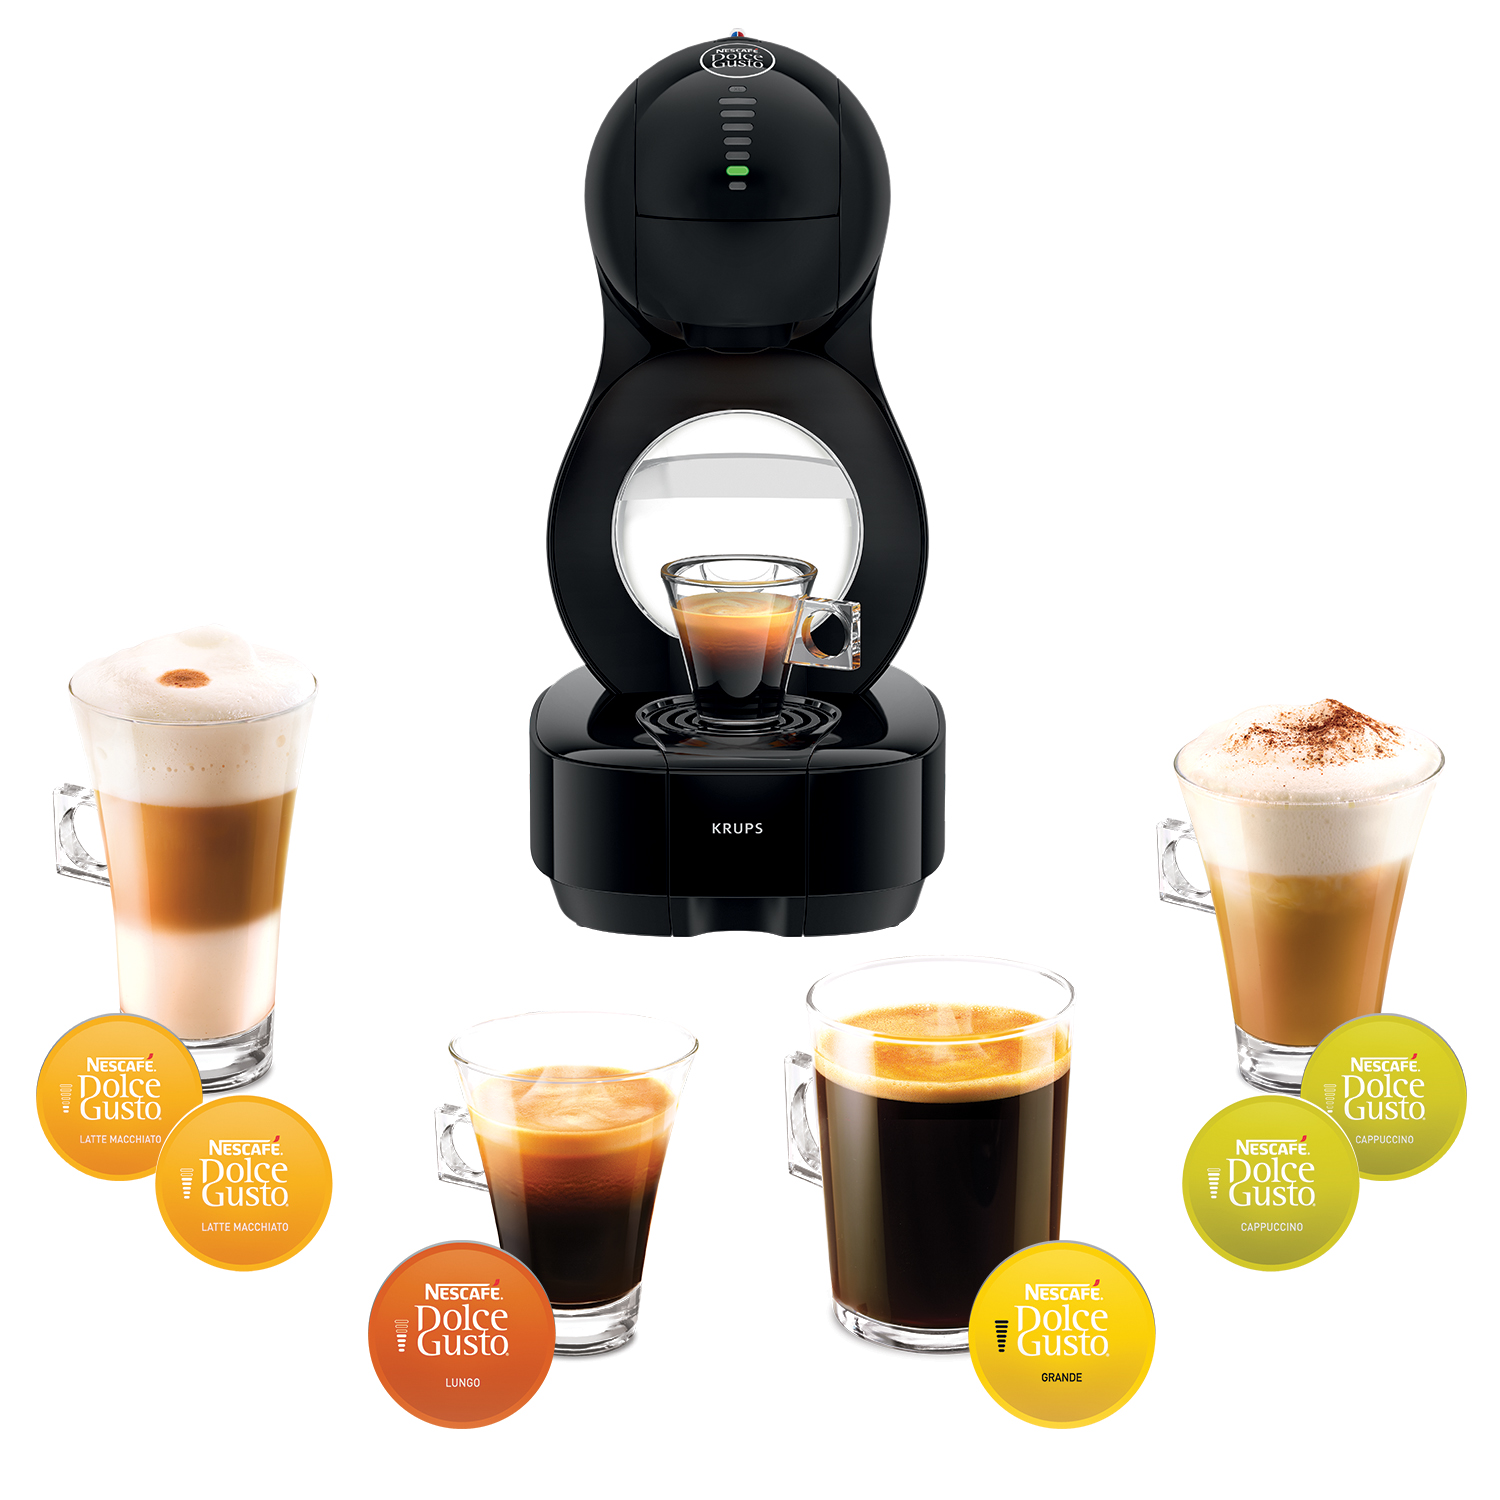 Abstraction Couverture Fjord nescafe dolce gusto machine how to use En ...